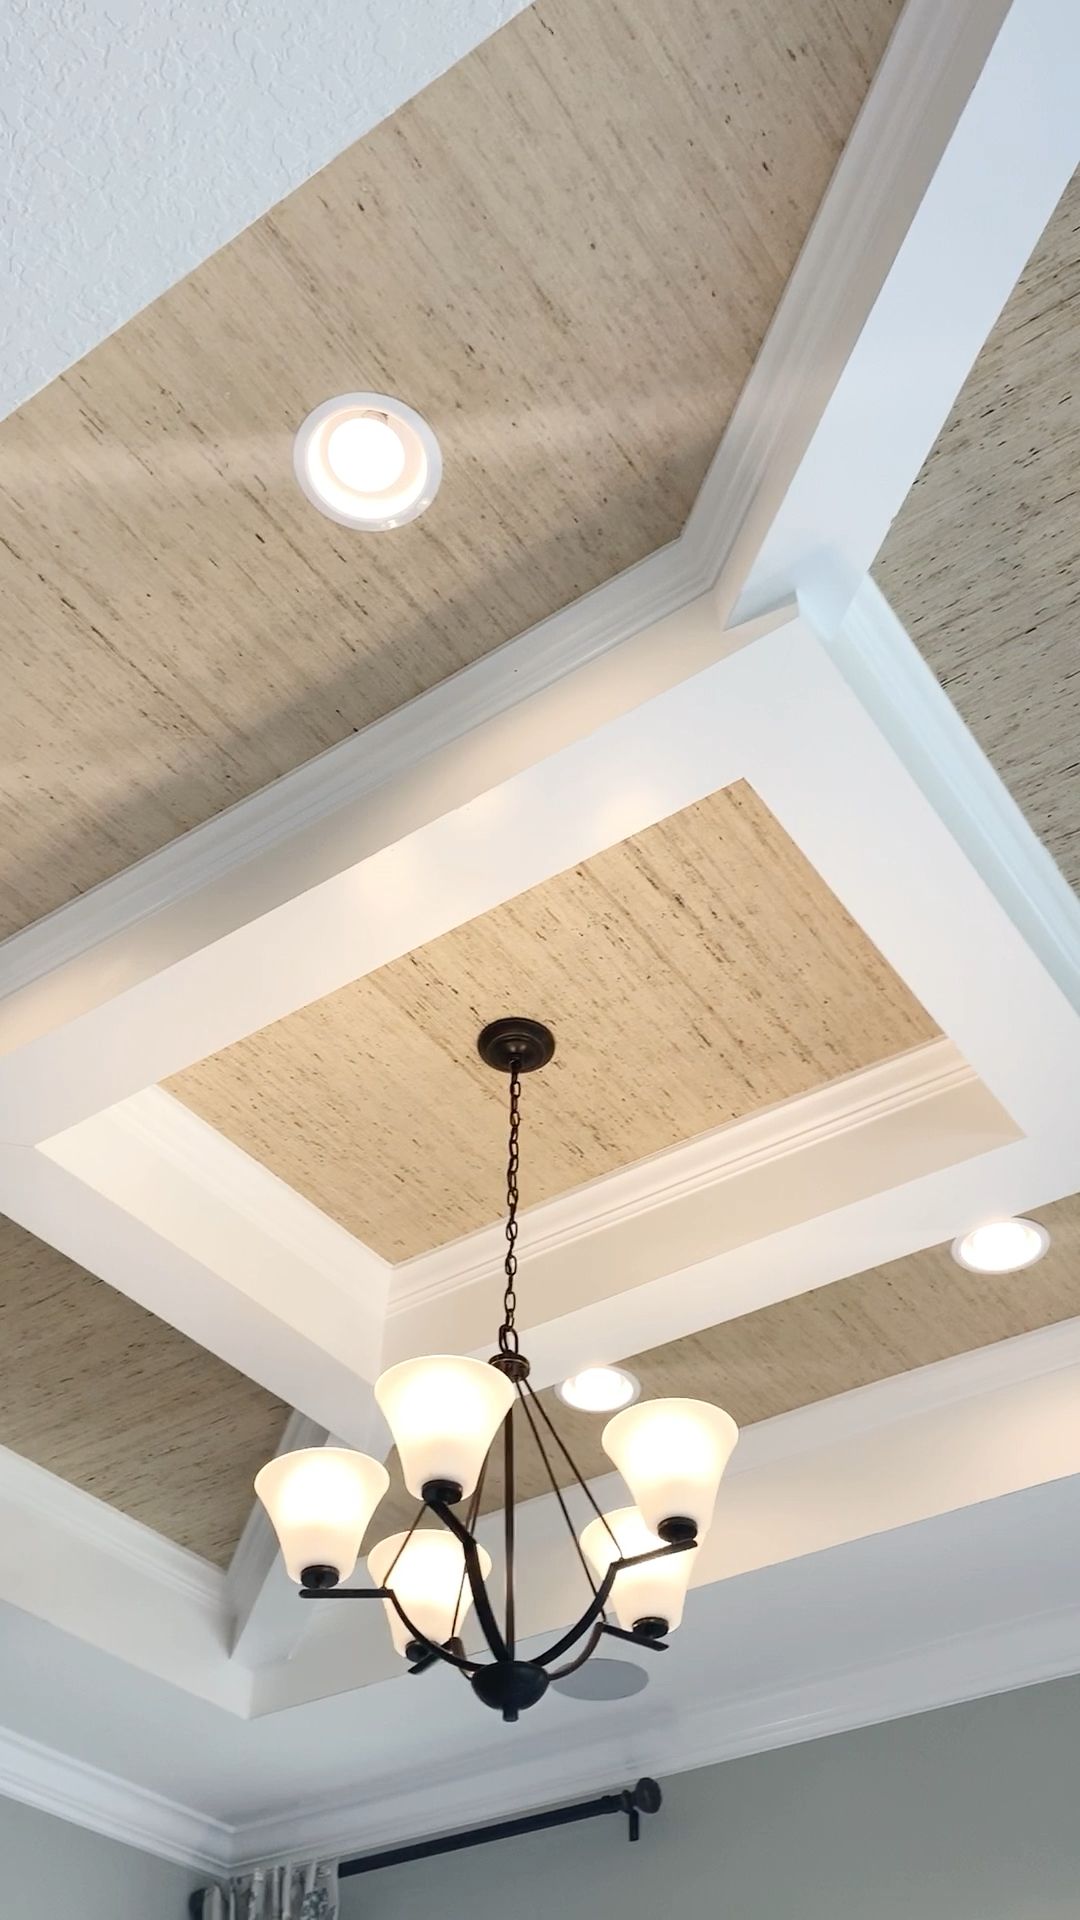 Coffered Ceiling Design with Molding Details